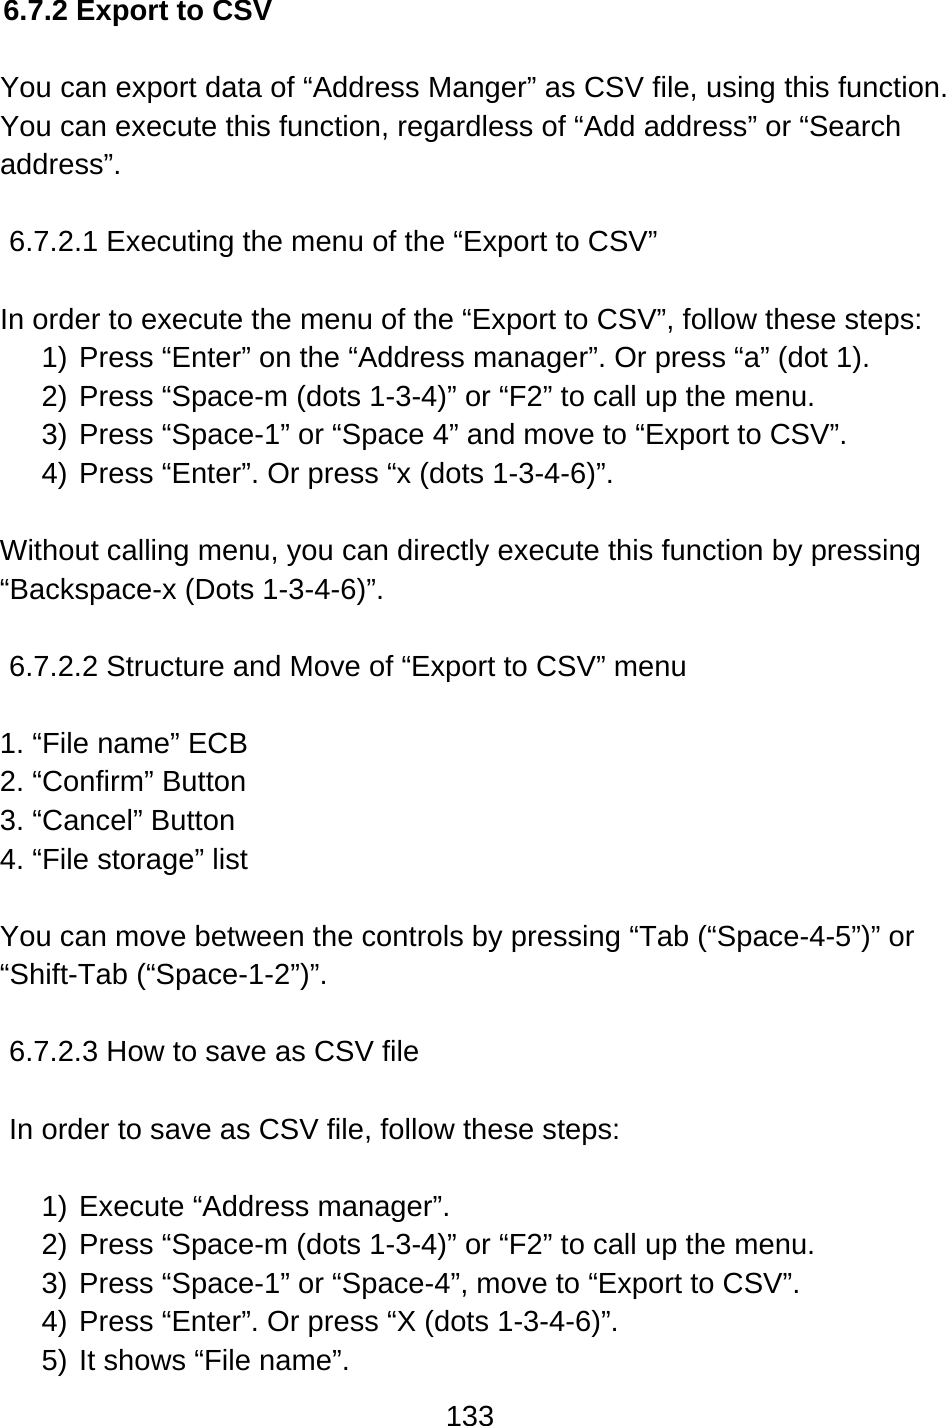 133  6.7.2 Export to CSV  You can export data of “Address Manger” as CSV file, using this function. You can execute this function, regardless of “Add address” or “Search address”.  6.7.2.1 Executing the menu of the “Export to CSV”  In order to execute the menu of the “Export to CSV”, follow these steps: 1) Press “Enter” on the “Address manager”. Or press “a” (dot 1). 2) Press “Space-m (dots 1-3-4)” or “F2” to call up the menu. 3) Press “Space-1” or “Space 4” and move to “Export to CSV”. 4) Press “Enter”. Or press “x (dots 1-3-4-6)”.  Without calling menu, you can directly execute this function by pressing “Backspace-x (Dots 1-3-4-6)”.  6.7.2.2 Structure and Move of “Export to CSV” menu  1. “File name” ECB 2. “Confirm” Button 3. “Cancel” Button 4. “File storage” list  You can move between the controls by pressing “Tab (“Space-4-5”)” or “Shift-Tab (“Space-1-2”)”.  6.7.2.3 How to save as CSV file  In order to save as CSV file, follow these steps:  1) Execute “Address manager”. 2) Press “Space-m (dots 1-3-4)” or “F2” to call up the menu. 3) Press “Space-1” or “Space-4”, move to “Export to CSV”. 4) Press “Enter”. Or press “X (dots 1-3-4-6)”. 5) It shows “File name”.   